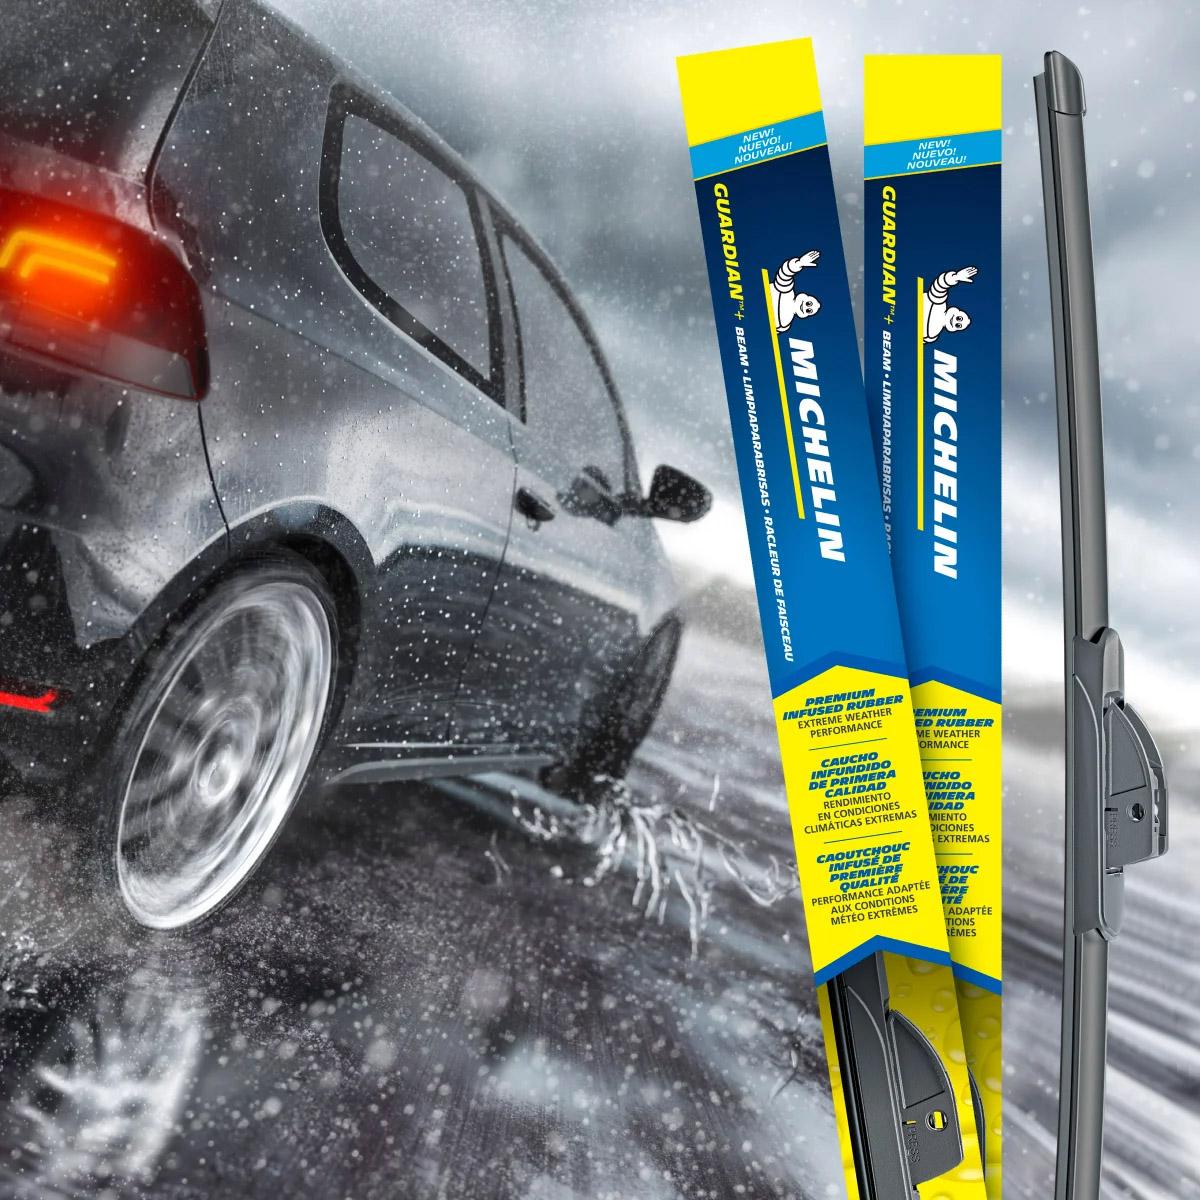 Michelin Guardian+ Beam Wiper Blades for $7.99 Shipped